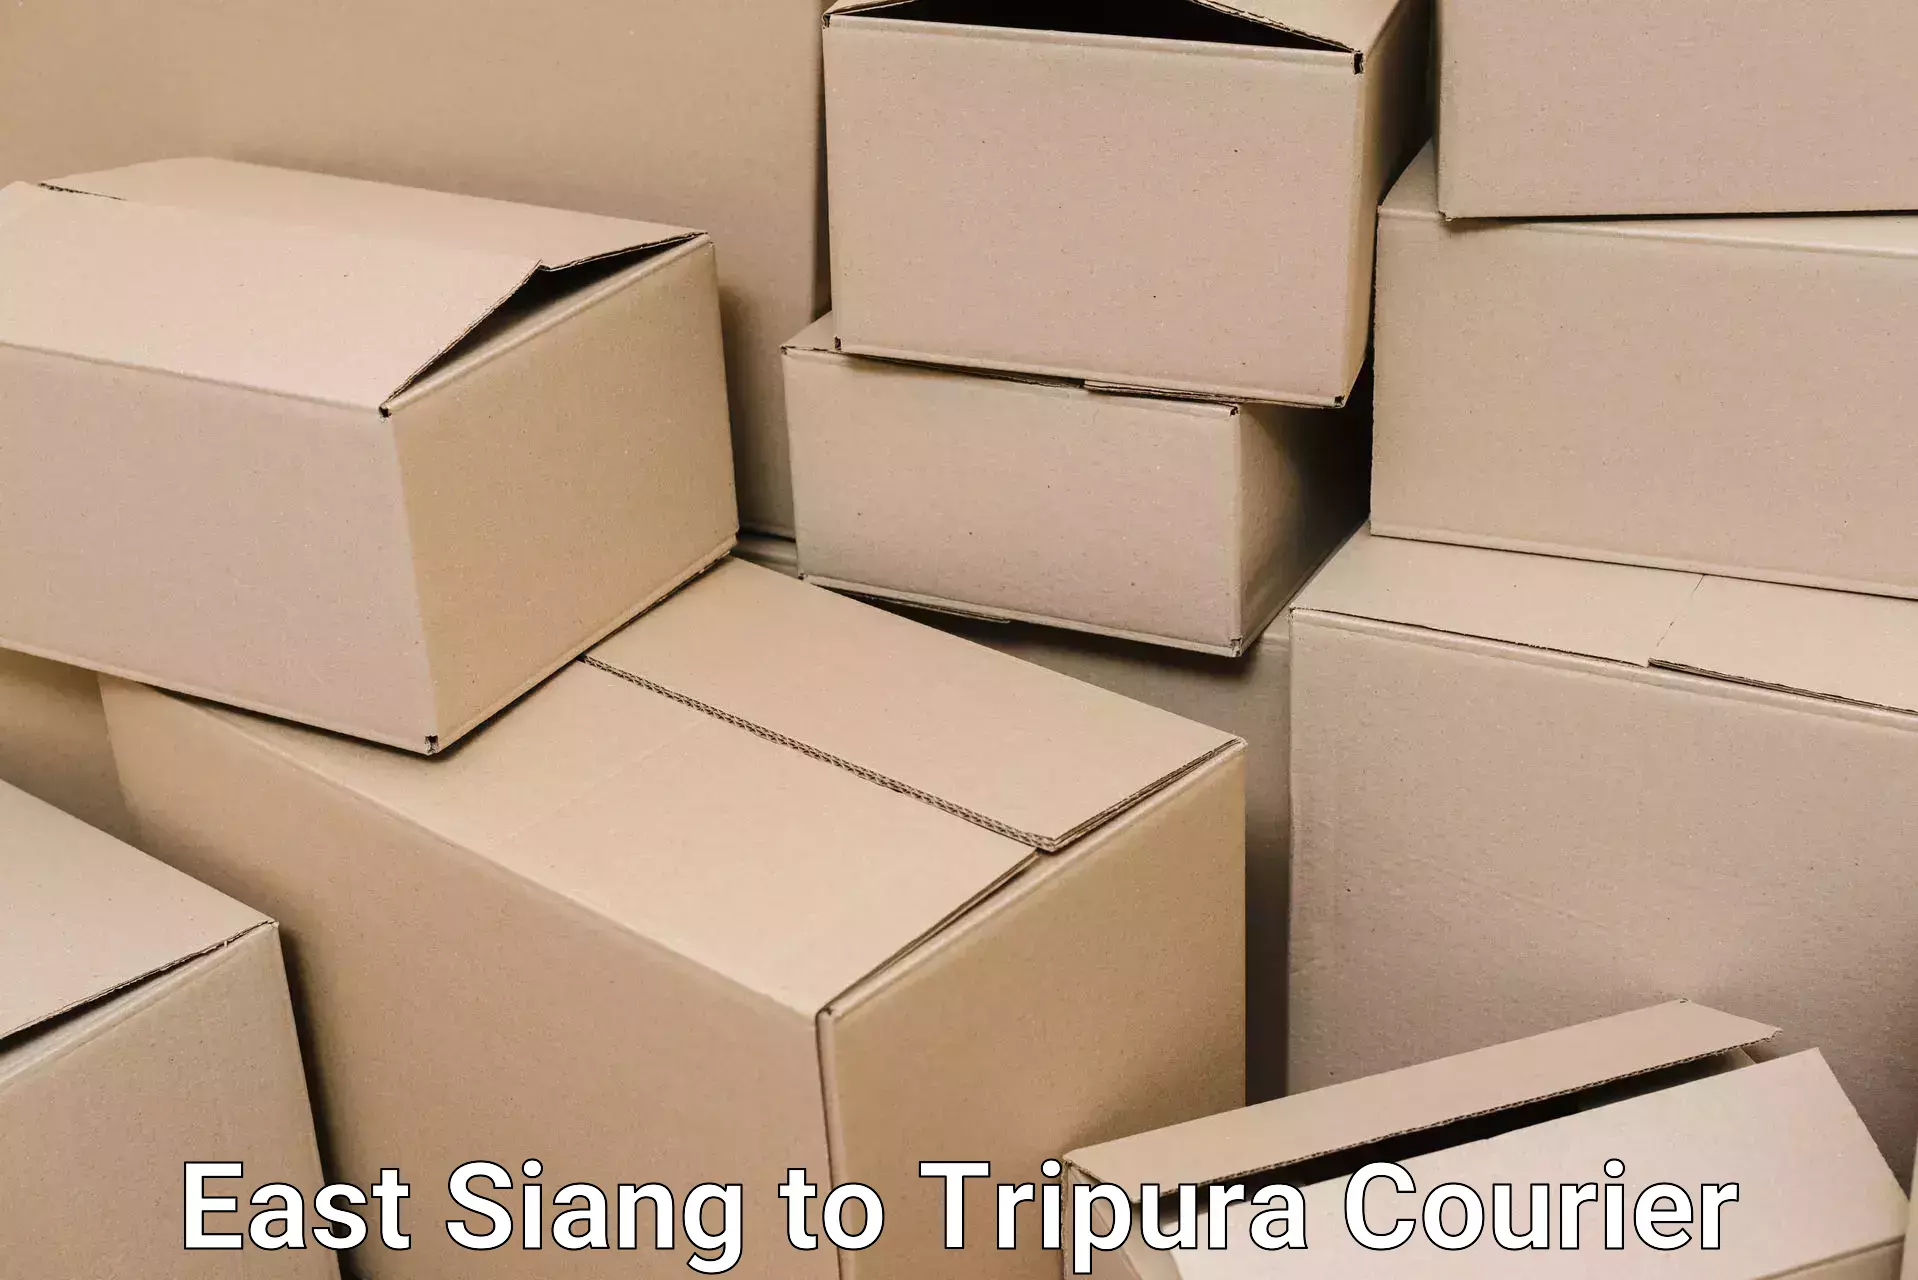 Trusted furniture transport East Siang to Udaipur Tripura